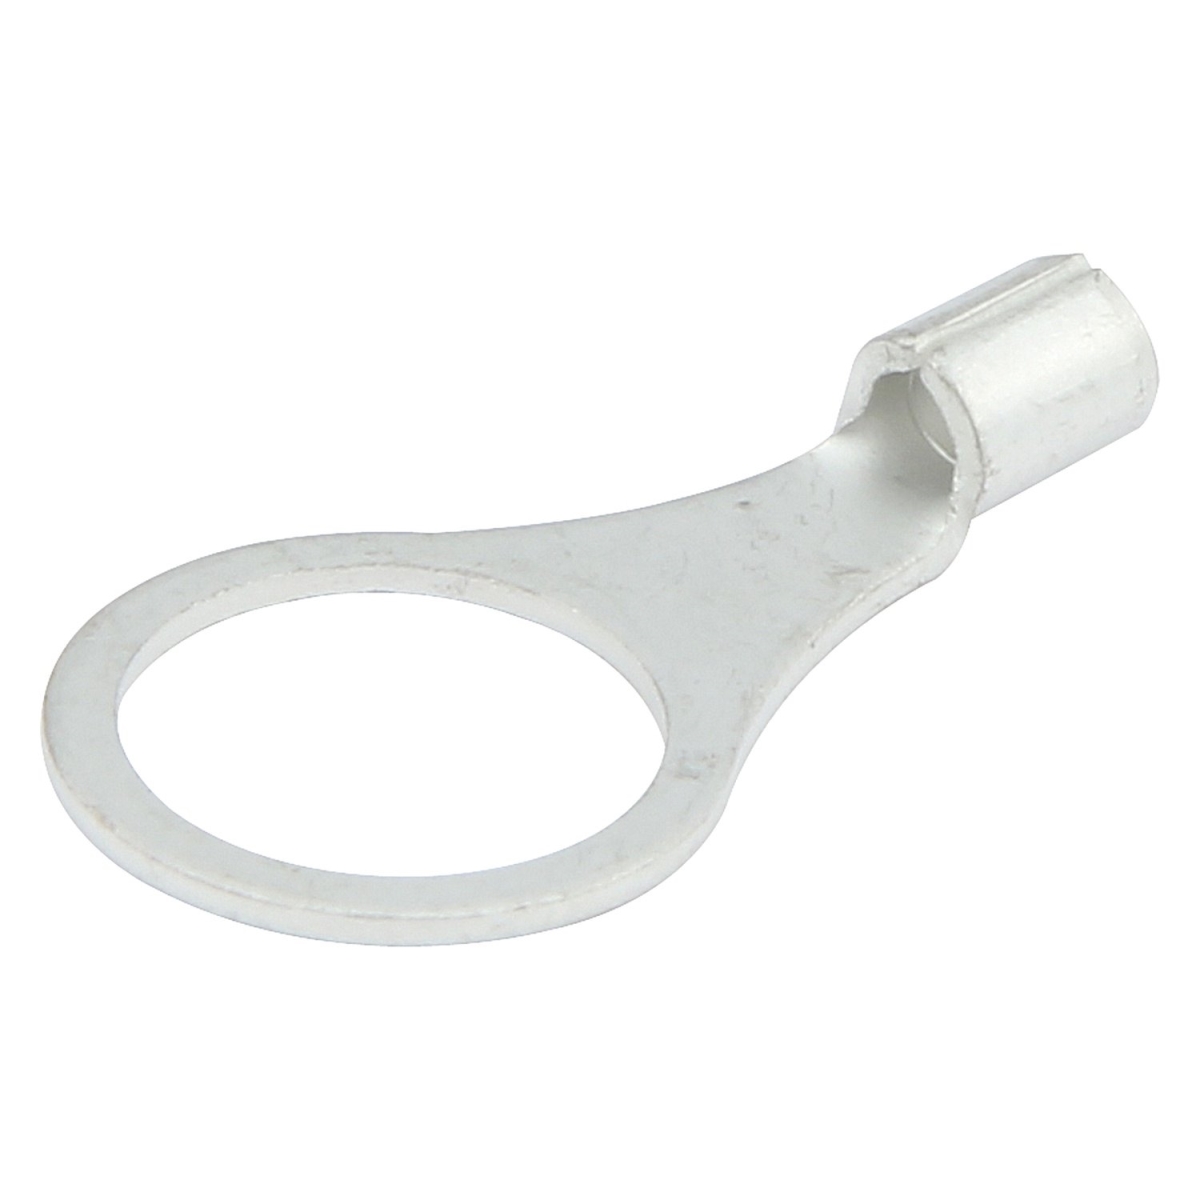 Picture of Allstar Performance ALL76016 0.37 in. Hole 16-14 Gauge Non-Insulated Ring Terminal - Pack of 20